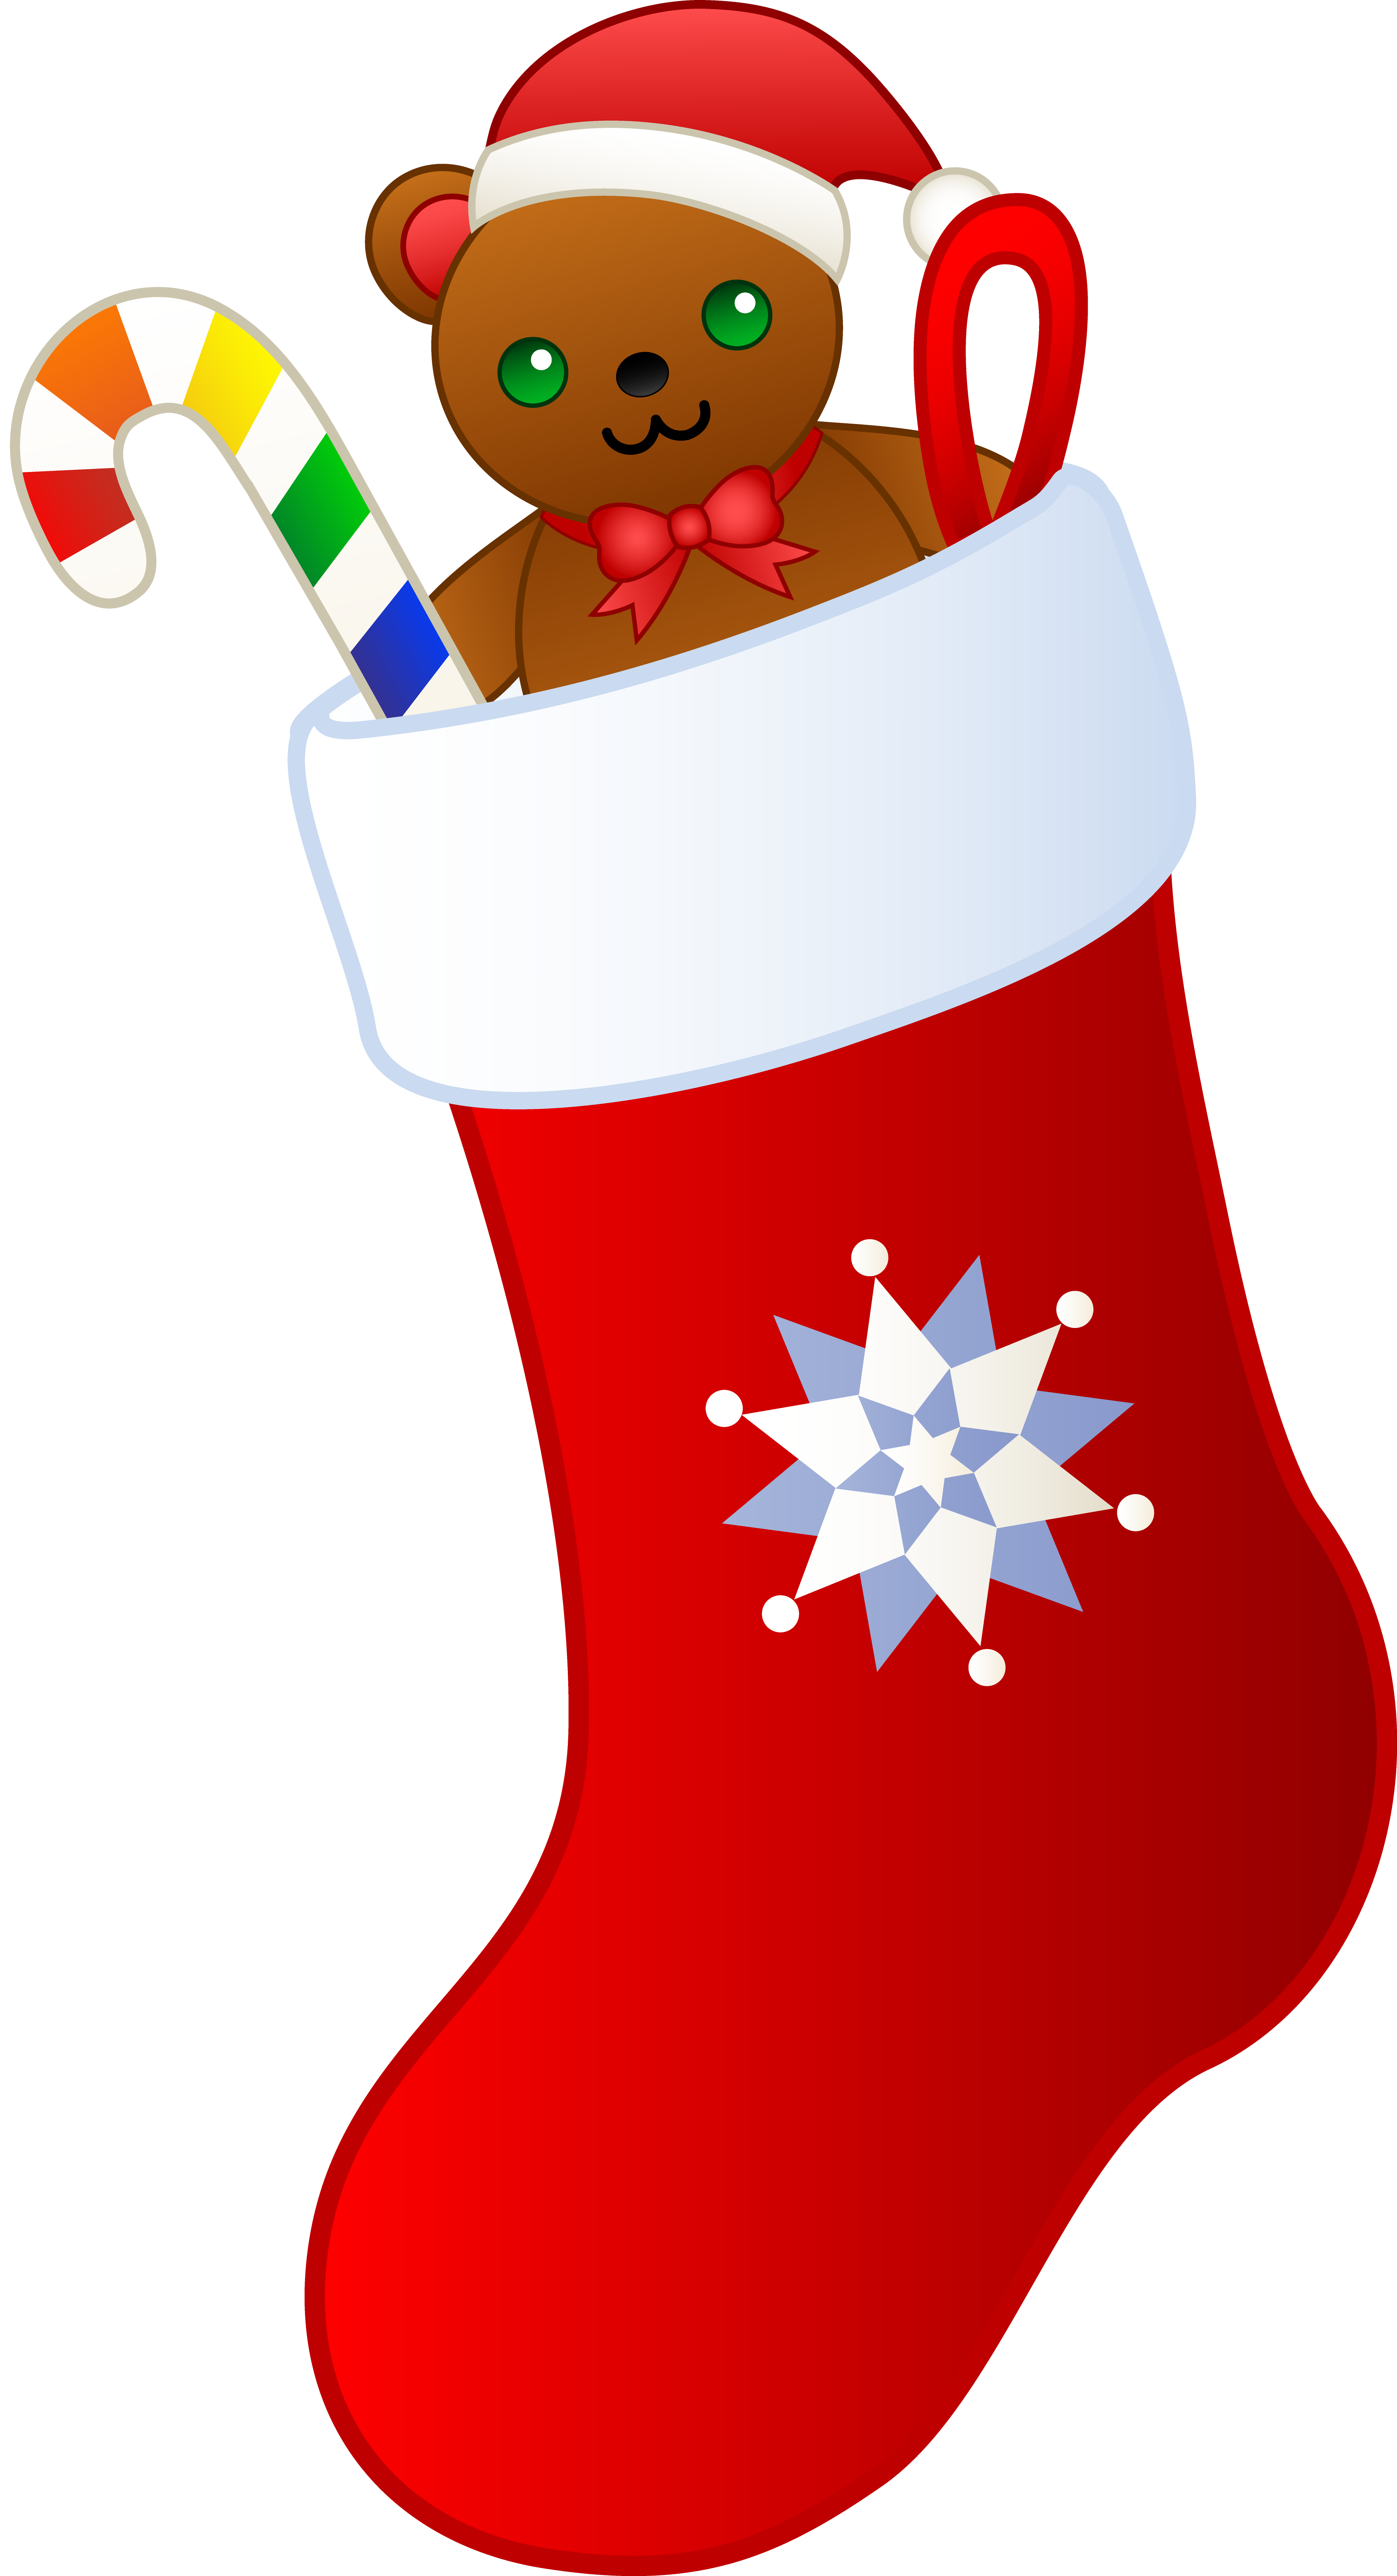 Xmas Stuff For > Christmas Cartoon Pictures Clip Art